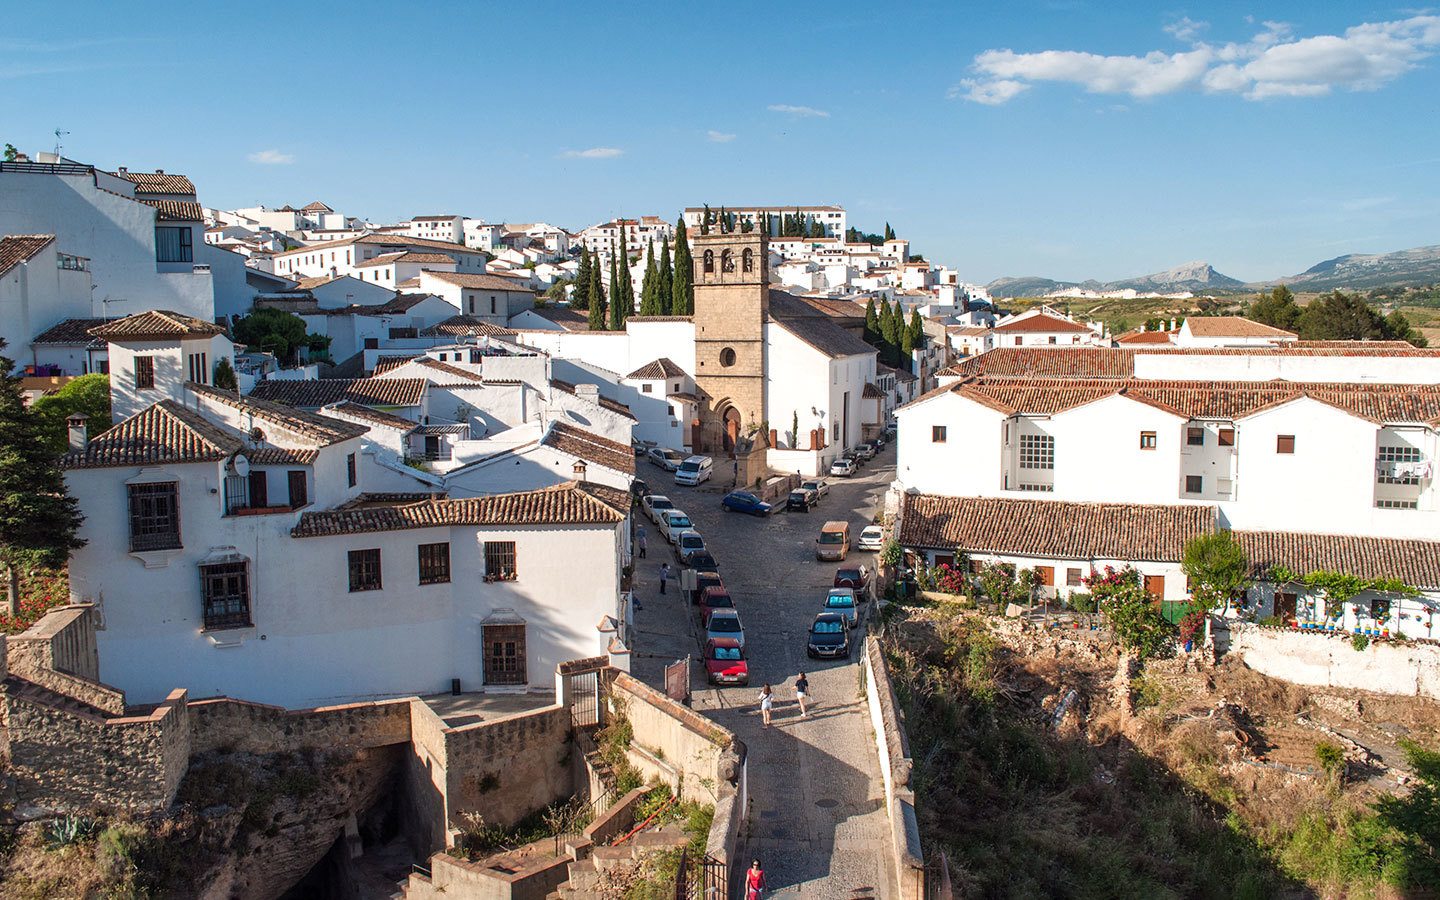 Ronda's old town